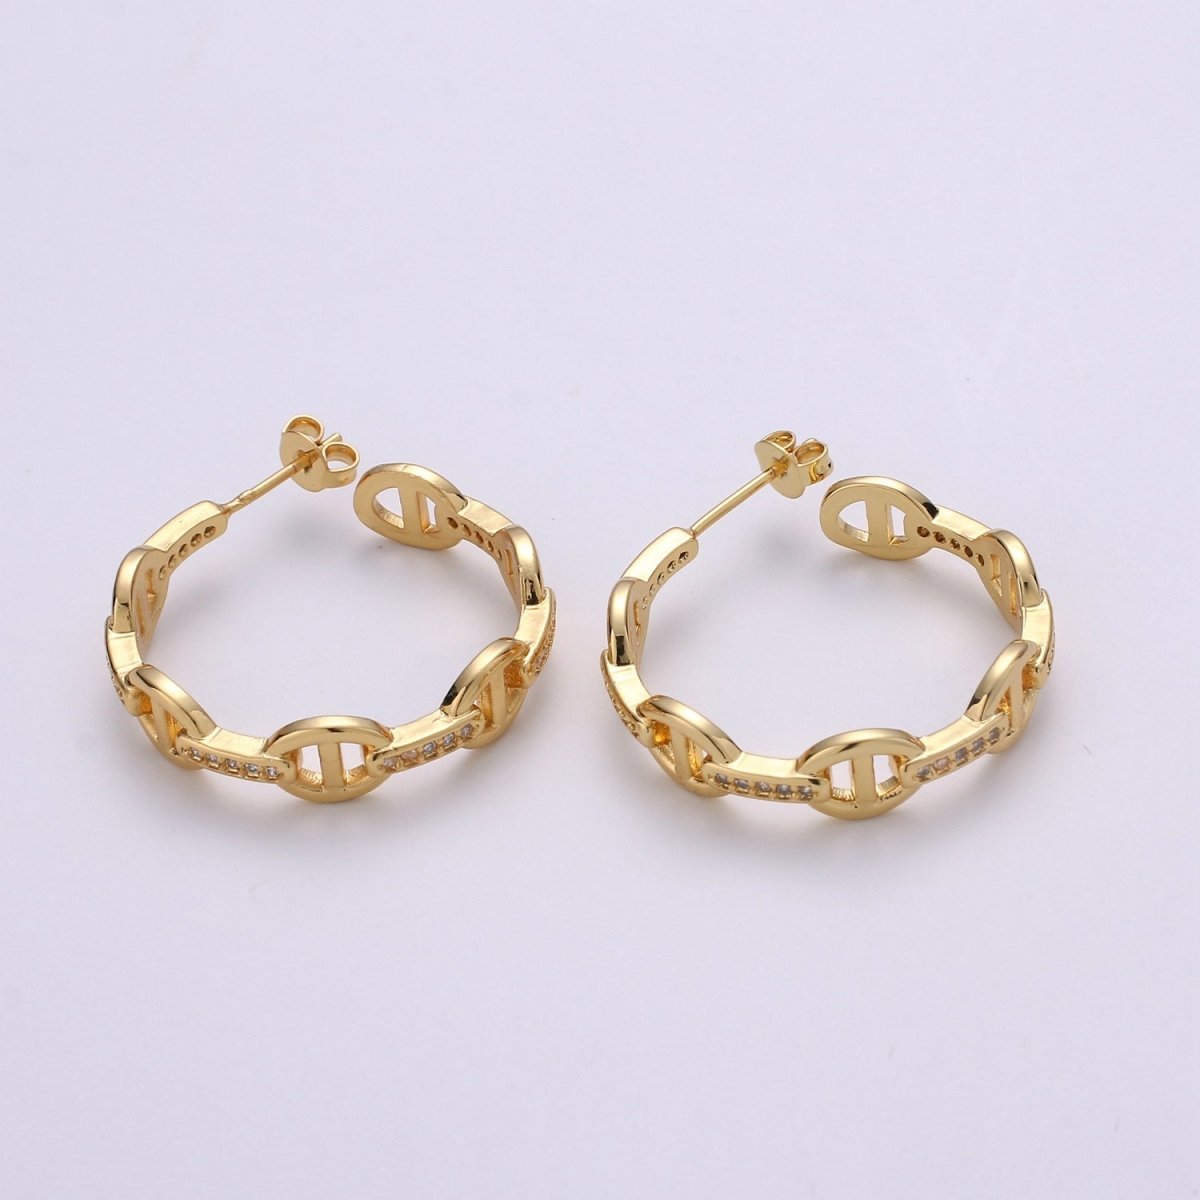 24K Gold Vermeil Mariner's Link Chain Earrings Gold Hoops Earring with CZ Cubic Zirconia Q-119 - DLUXCA